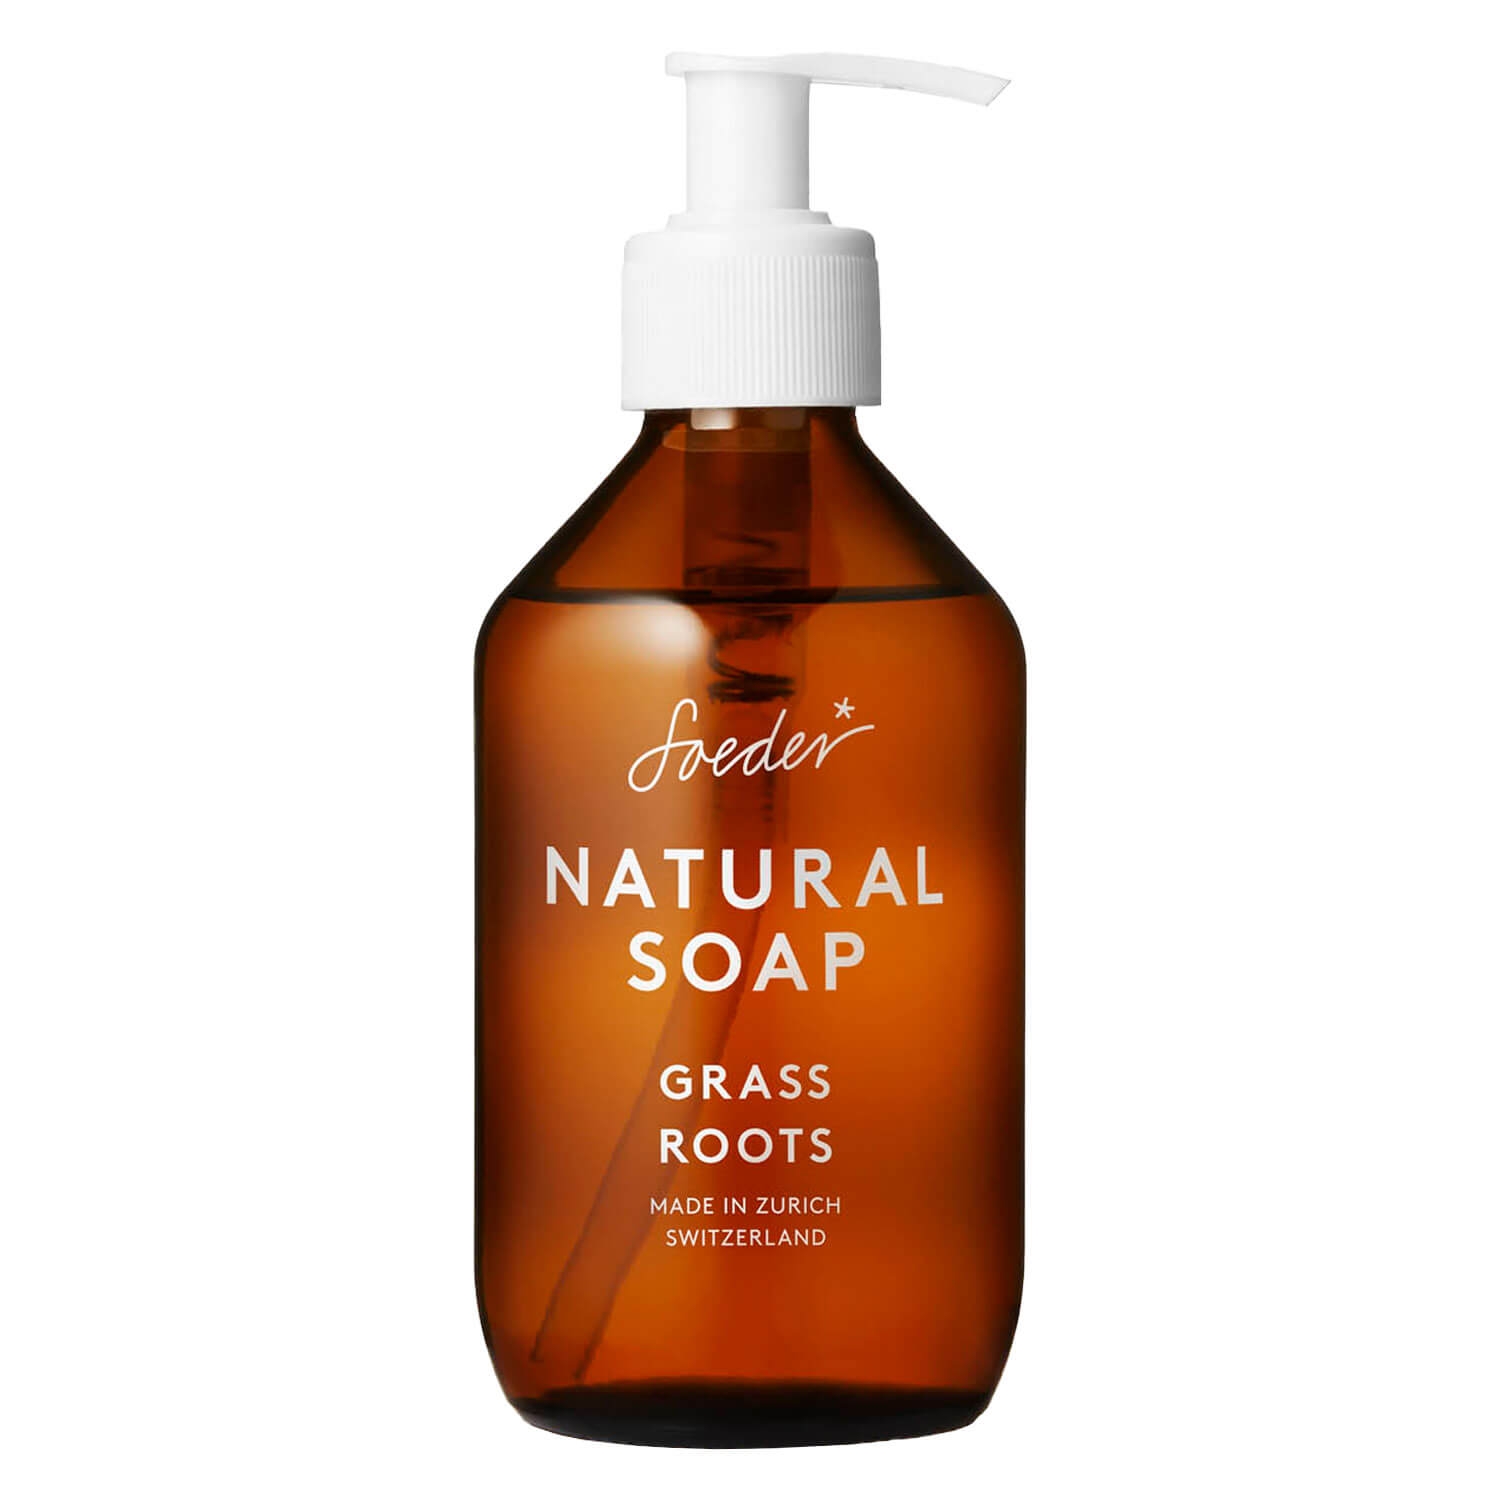 Product image from Soeder - Natural Soap Grass Roots